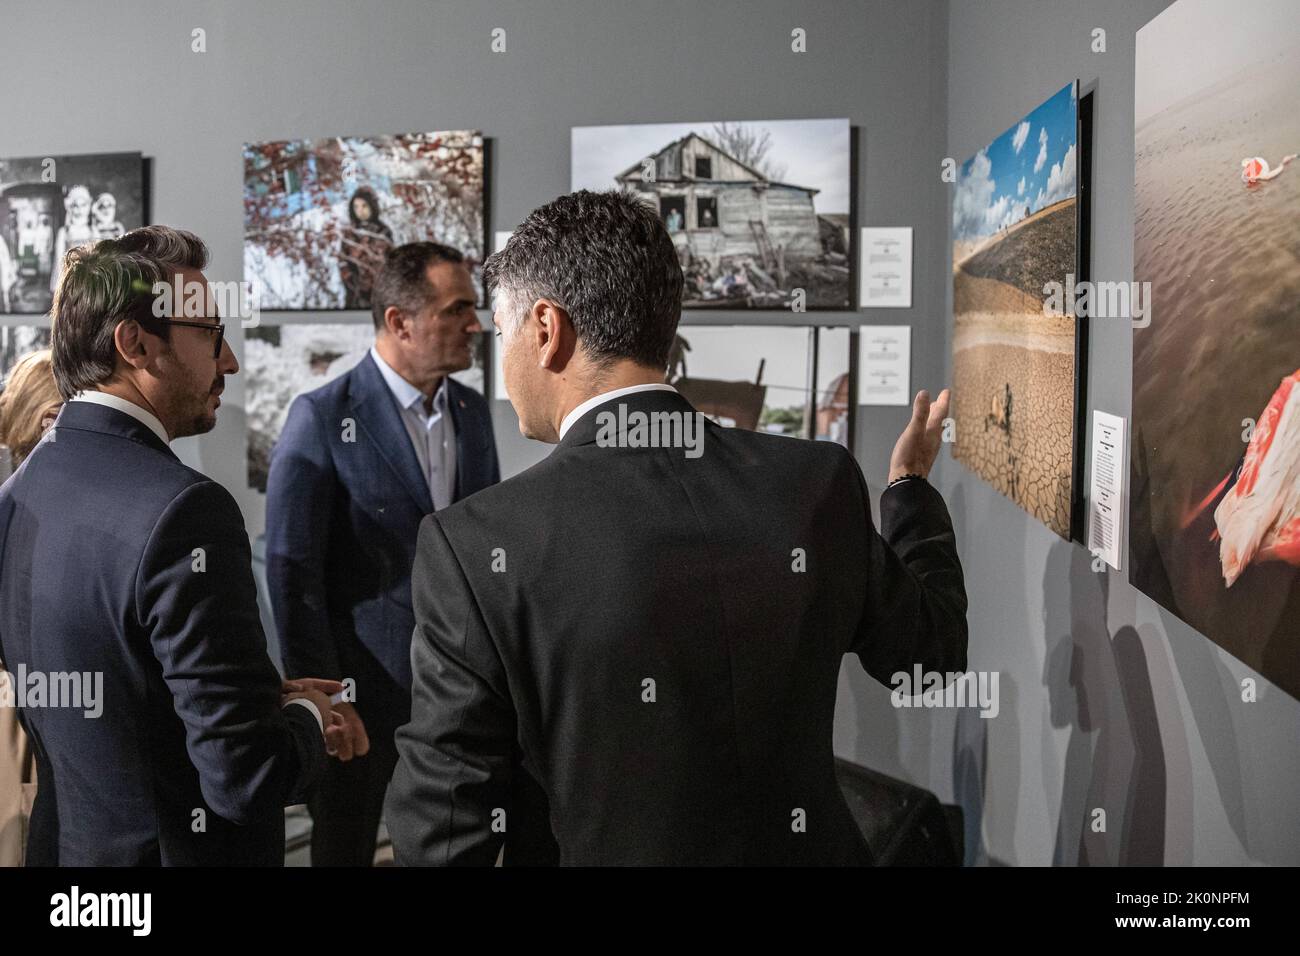 Istanbul, Turkey, 12/09/2022, Anadolu Agency Visual News Editor Firat Yurdakul (right) seen giving information about the photographs on display. Istanbul Photo Awards 2022 Exhibition At Mimar Sinan Fine Arts University Tophane-i Amire Culture and Art Center, at the Single Dome building, with the participation of Anadolu Agency General Manager Serdar Karagoz, after the opening speech, Mimar Sinan Fine Arts University Rector Prof. Dr. Handan ?nci Elci opened with the presence of Beyoglu Mayor Haydar Ali Yildiz and guests. Award-winning photographs will be open to visitors until the end of Septem Stock Photo